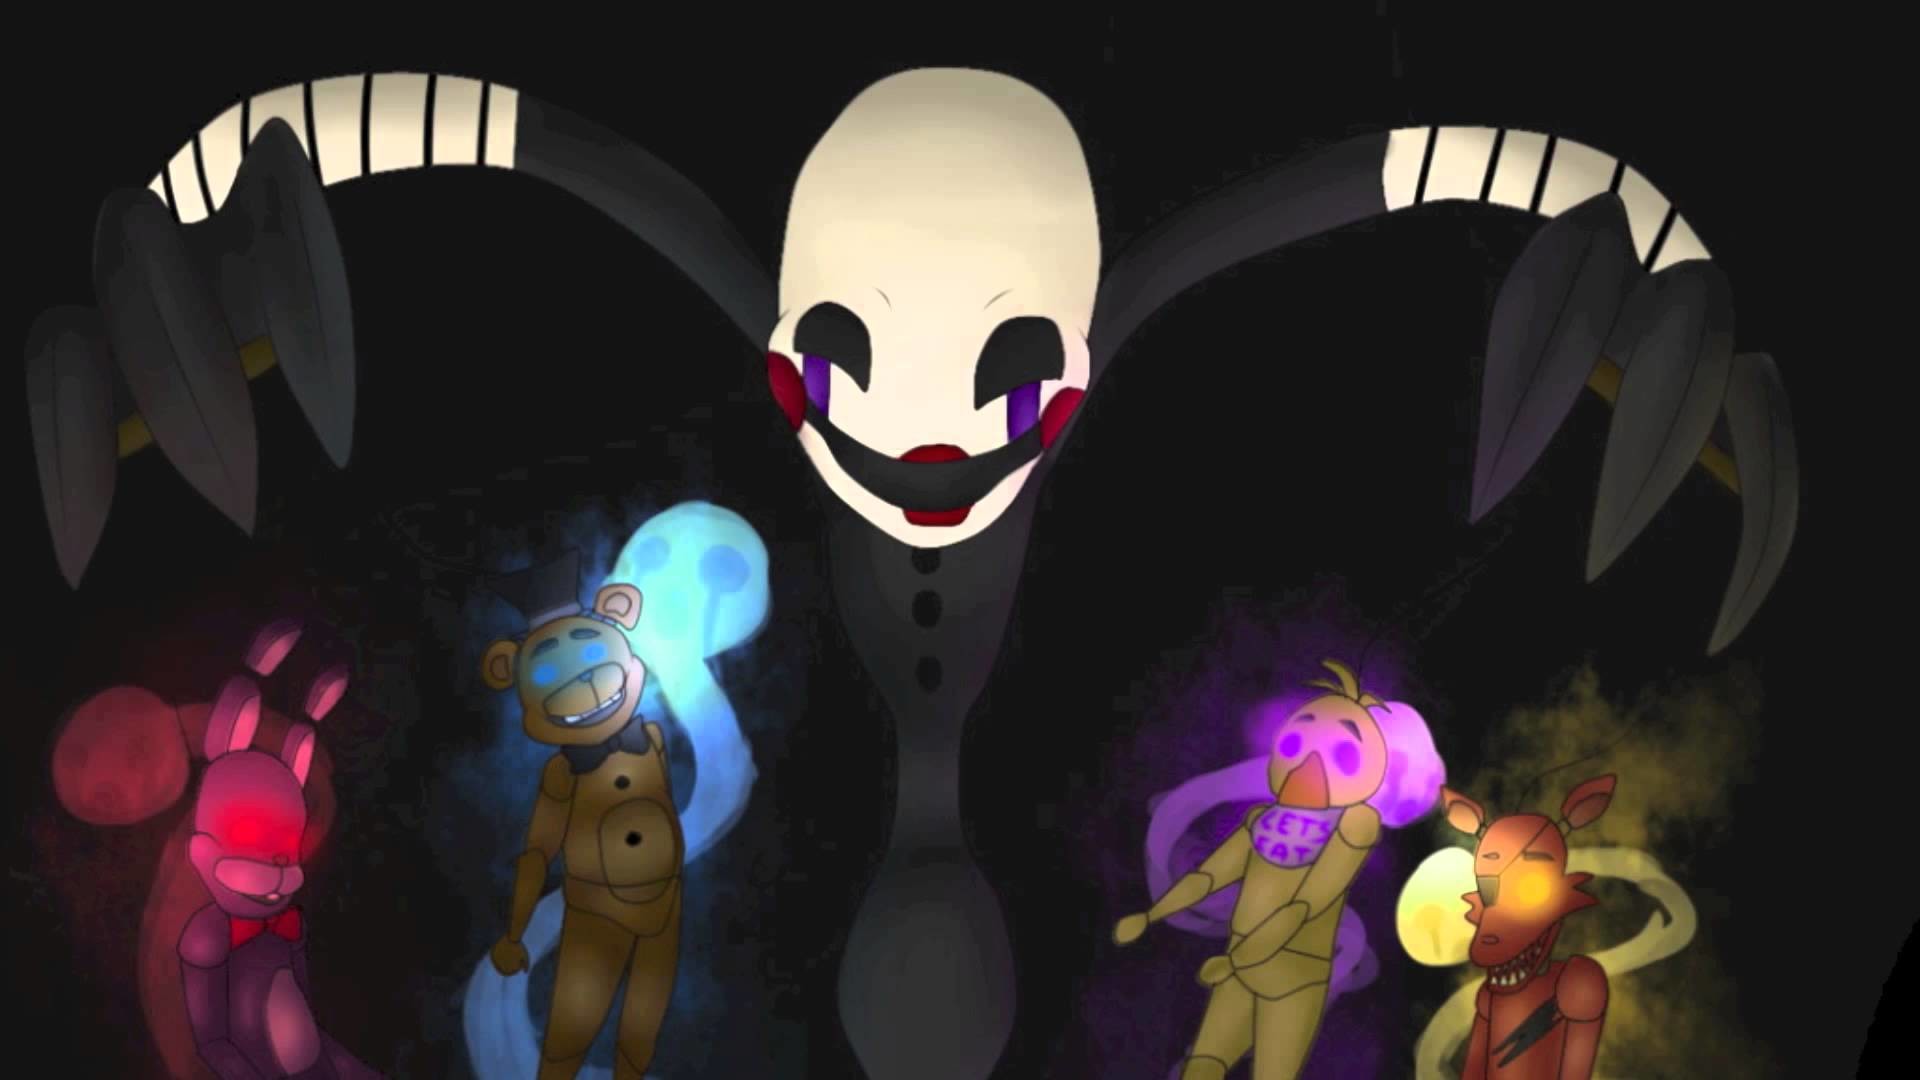 1920x1080 Nightcore - The Puppet (FNAF) - YouTube